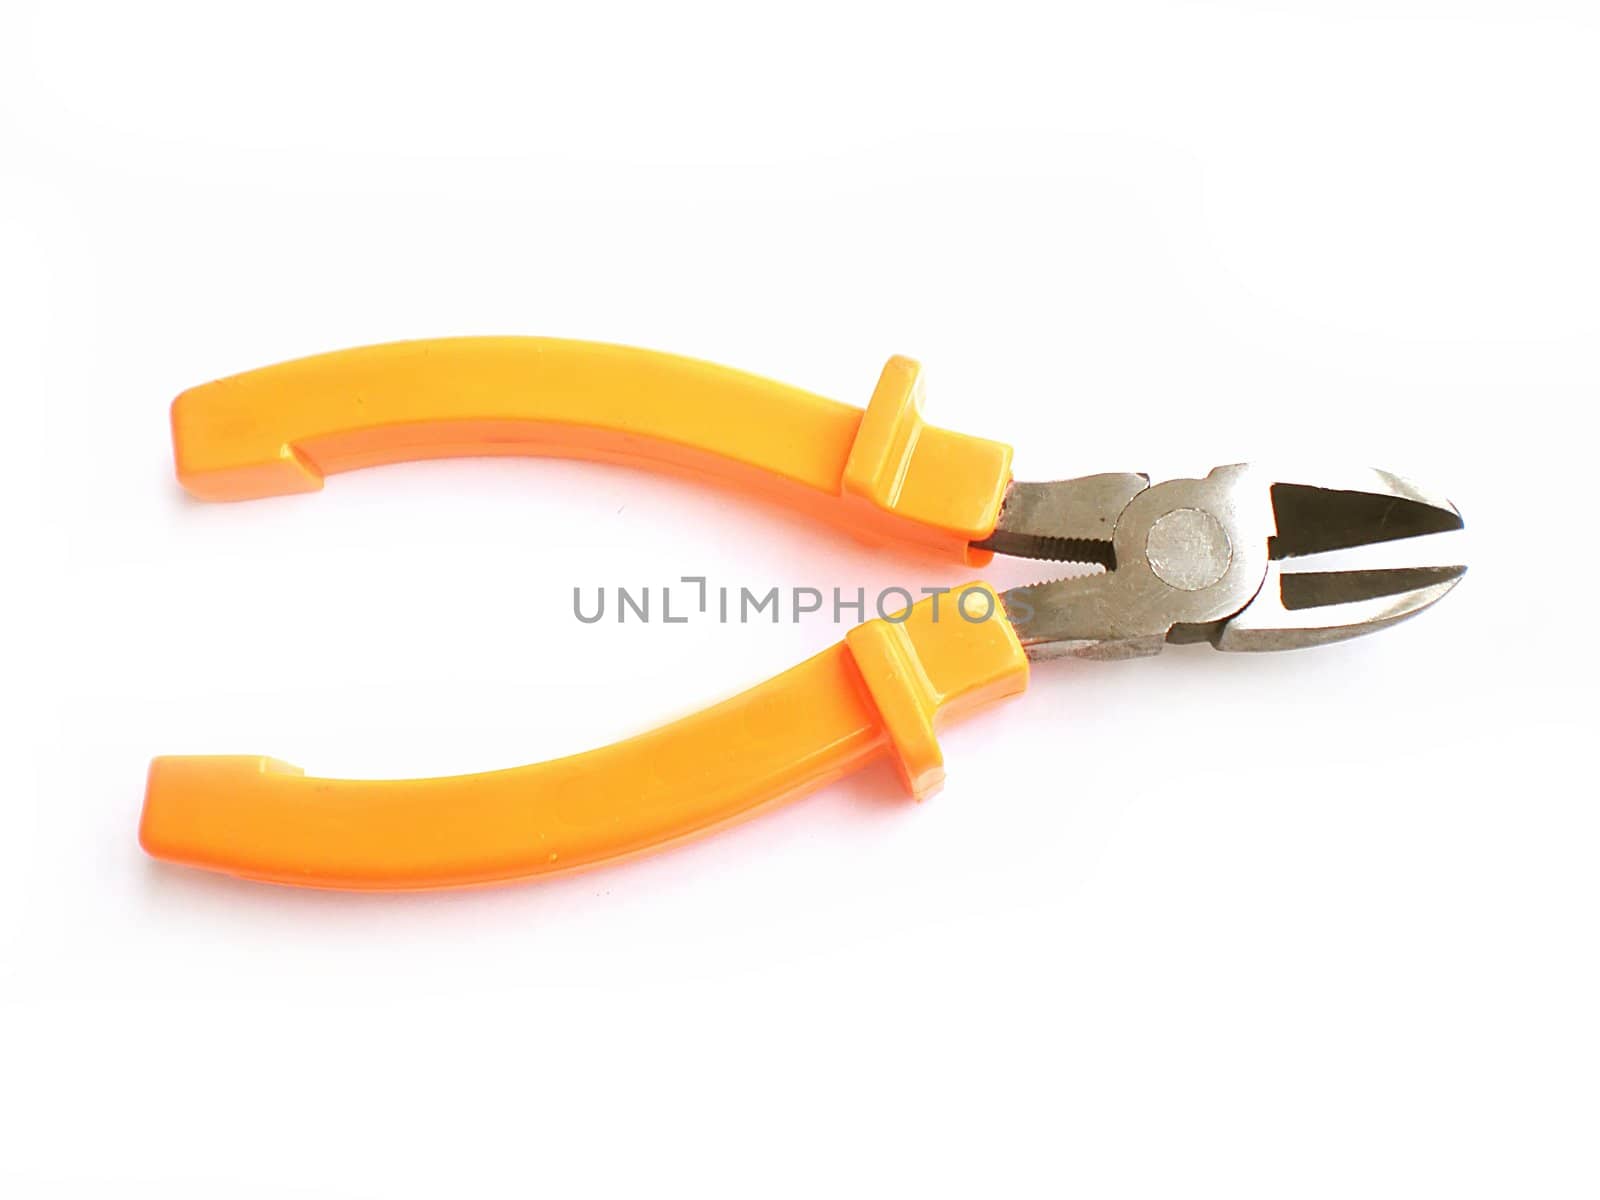 pliers on white background